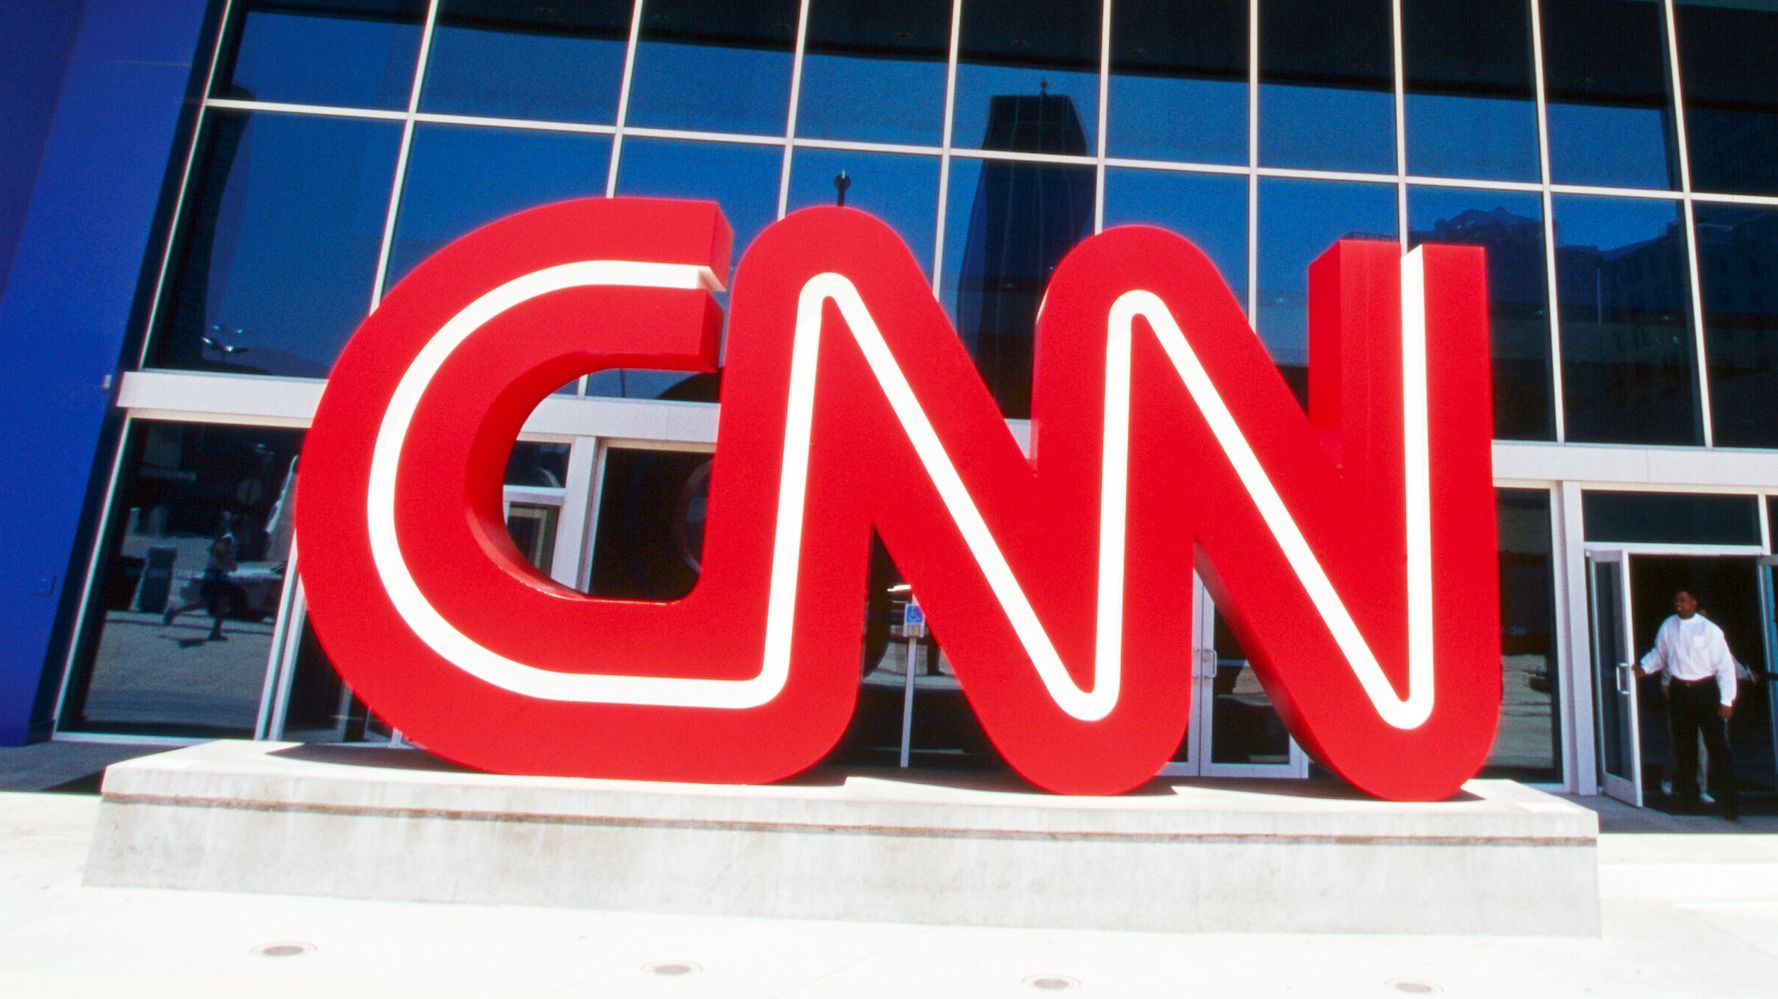 CNN Fires 3 Employees For Going Into The Office Unvaccinated Against COVID-19